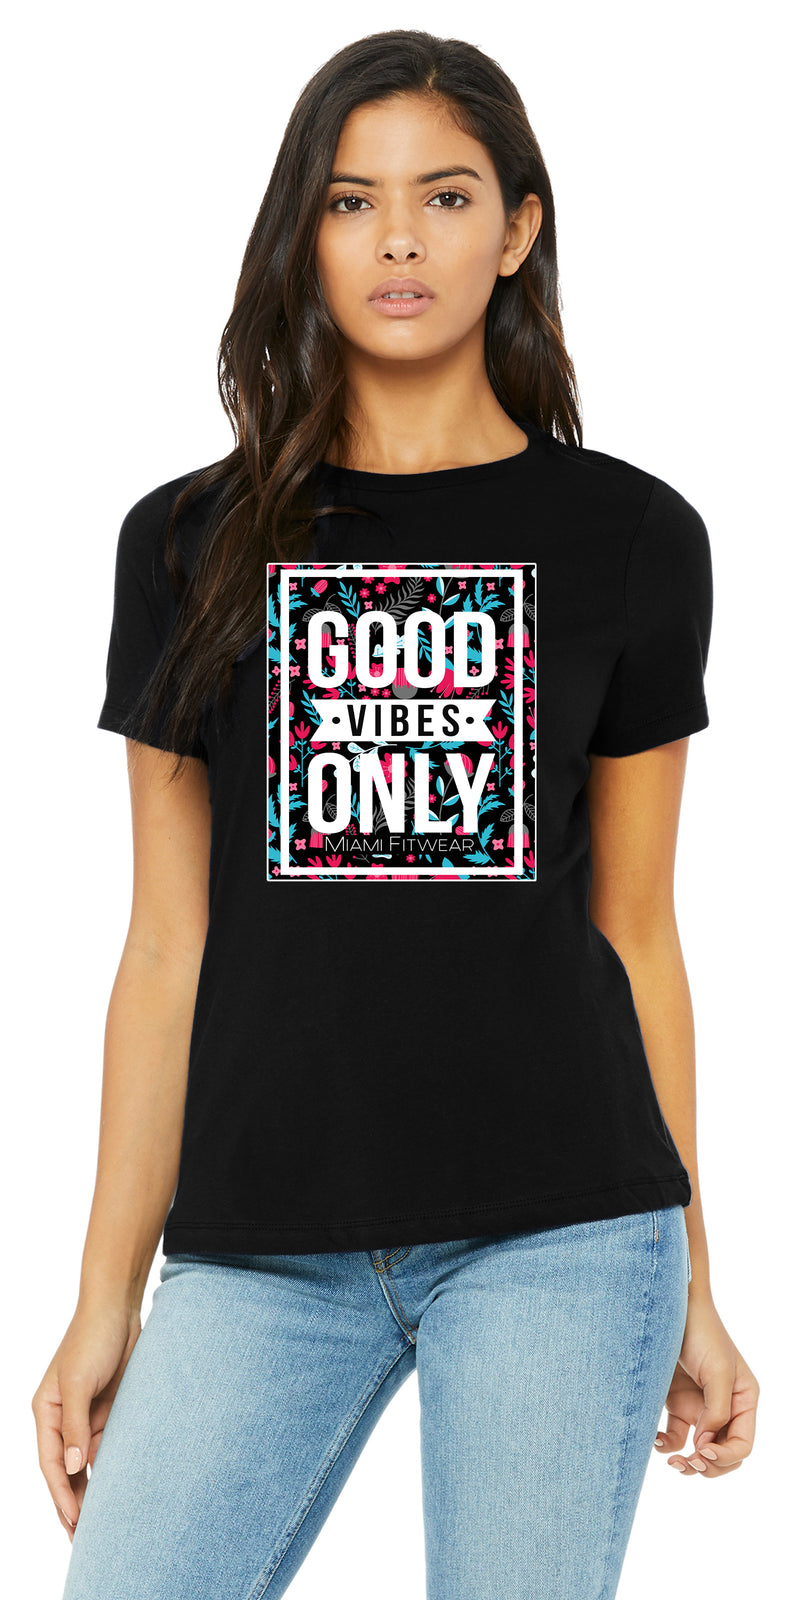 Good Vibes Only Shirt